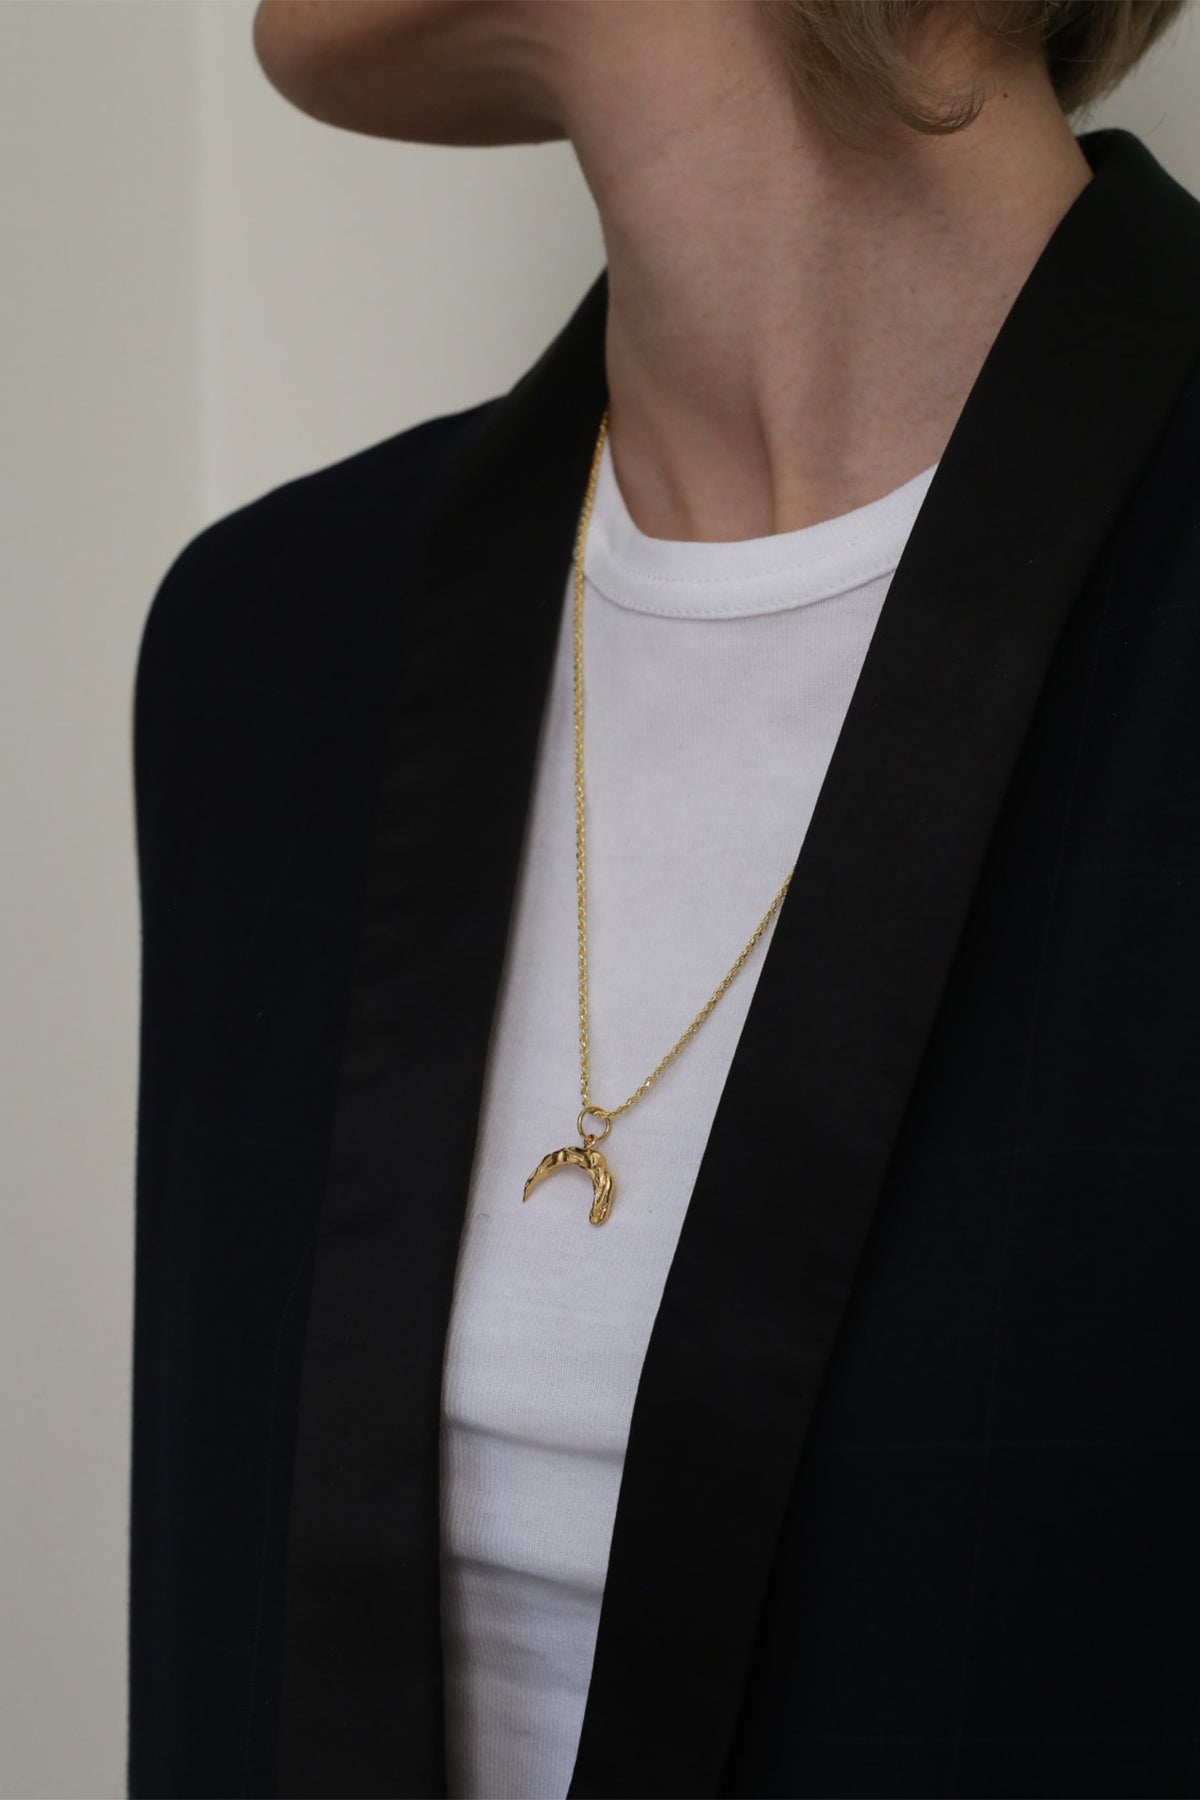 CORD CHAIN NECKLACE "MELIES TUSK" GOLD